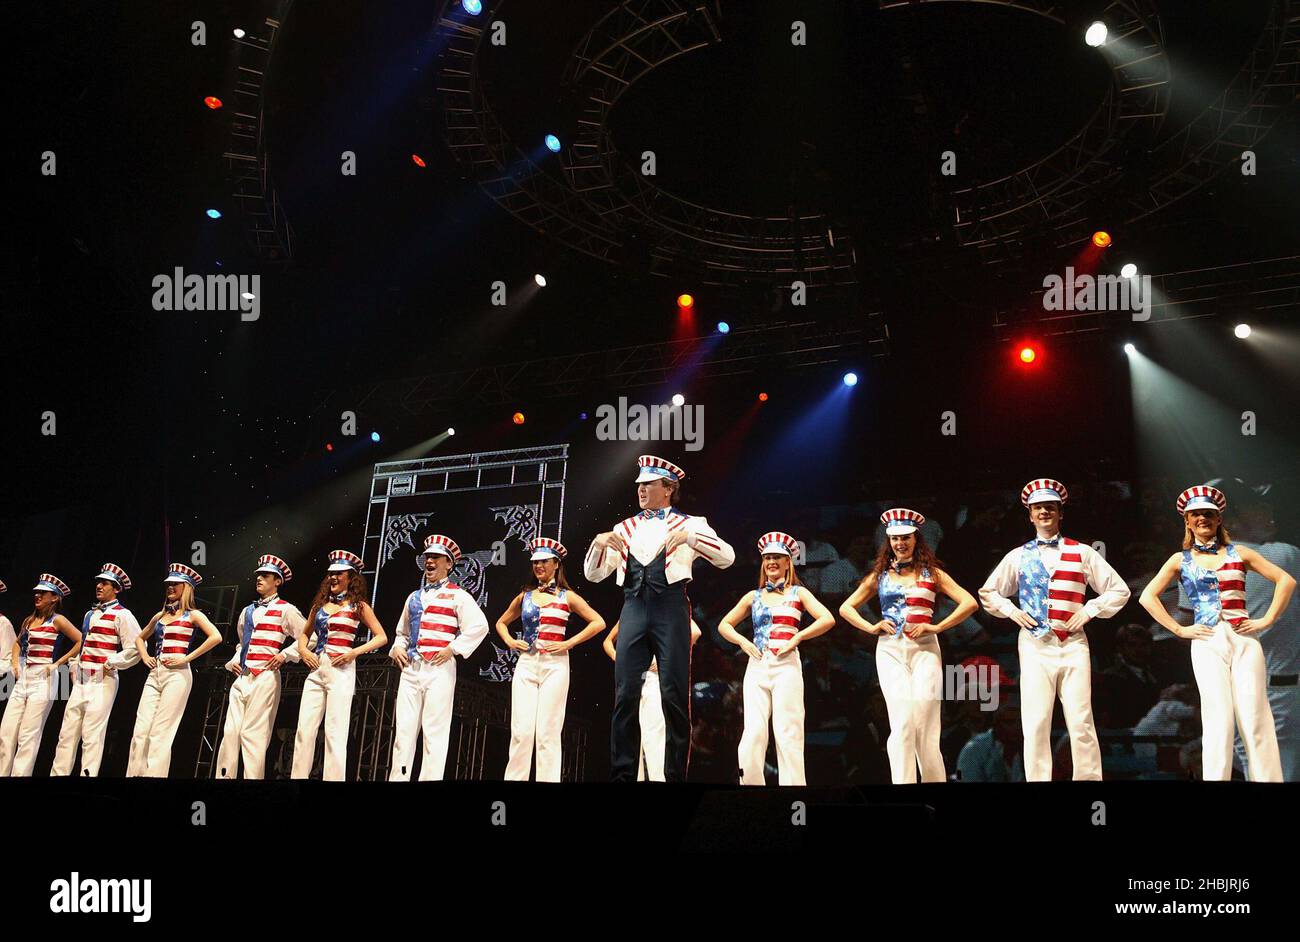 Michael Flatley and his Lord Of The Dance company perform on stage. Stock Photo